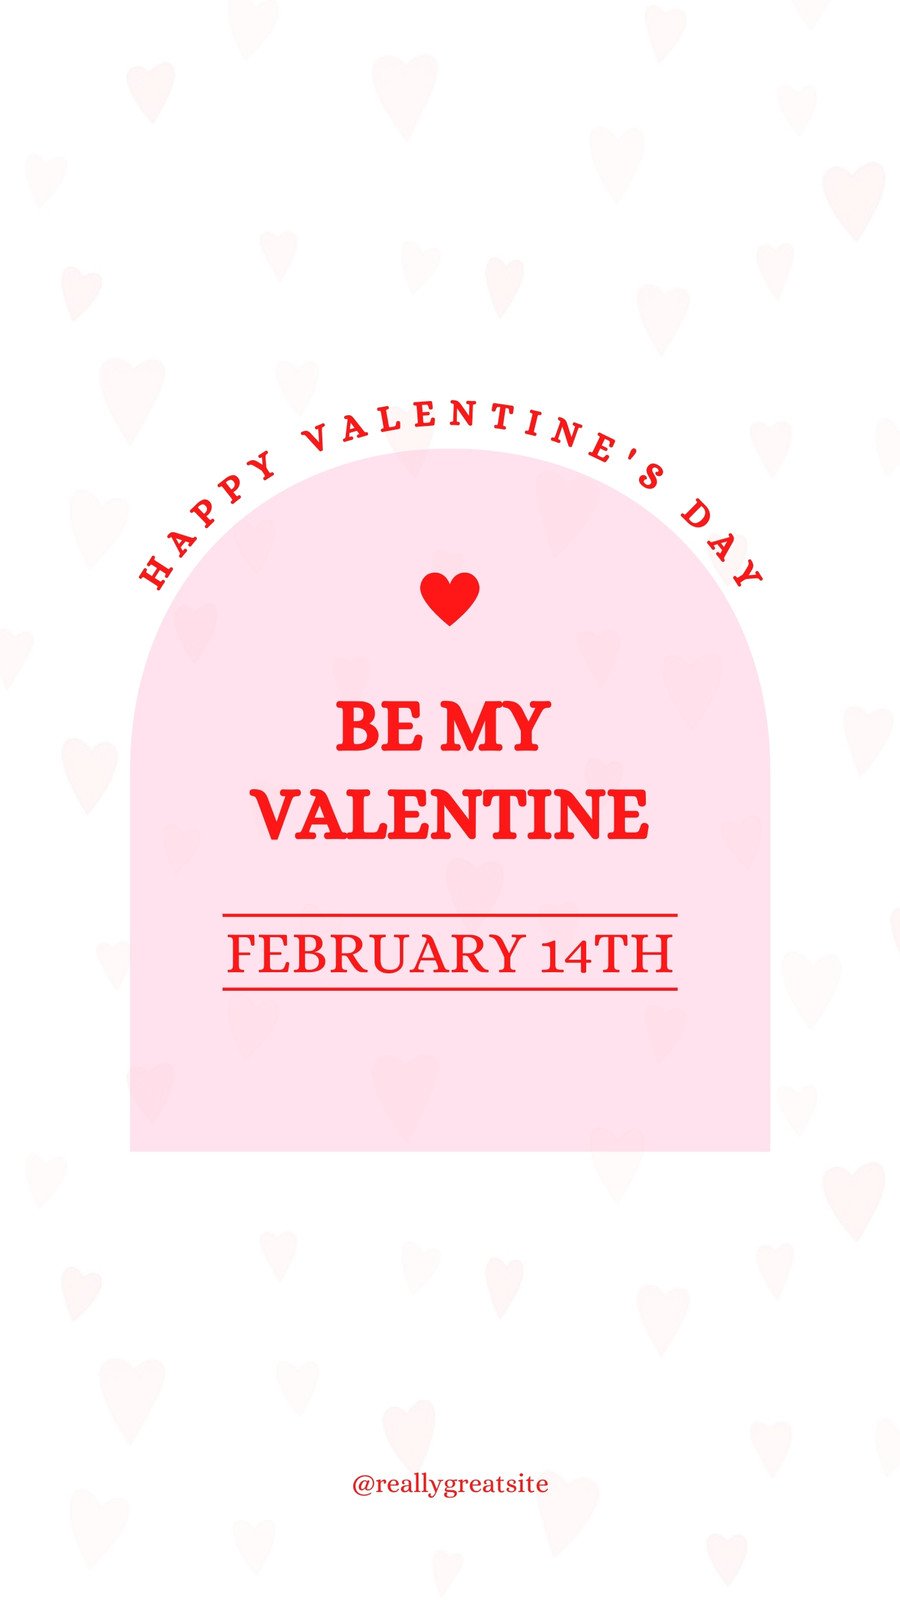 Valentine's Day (February 14th)